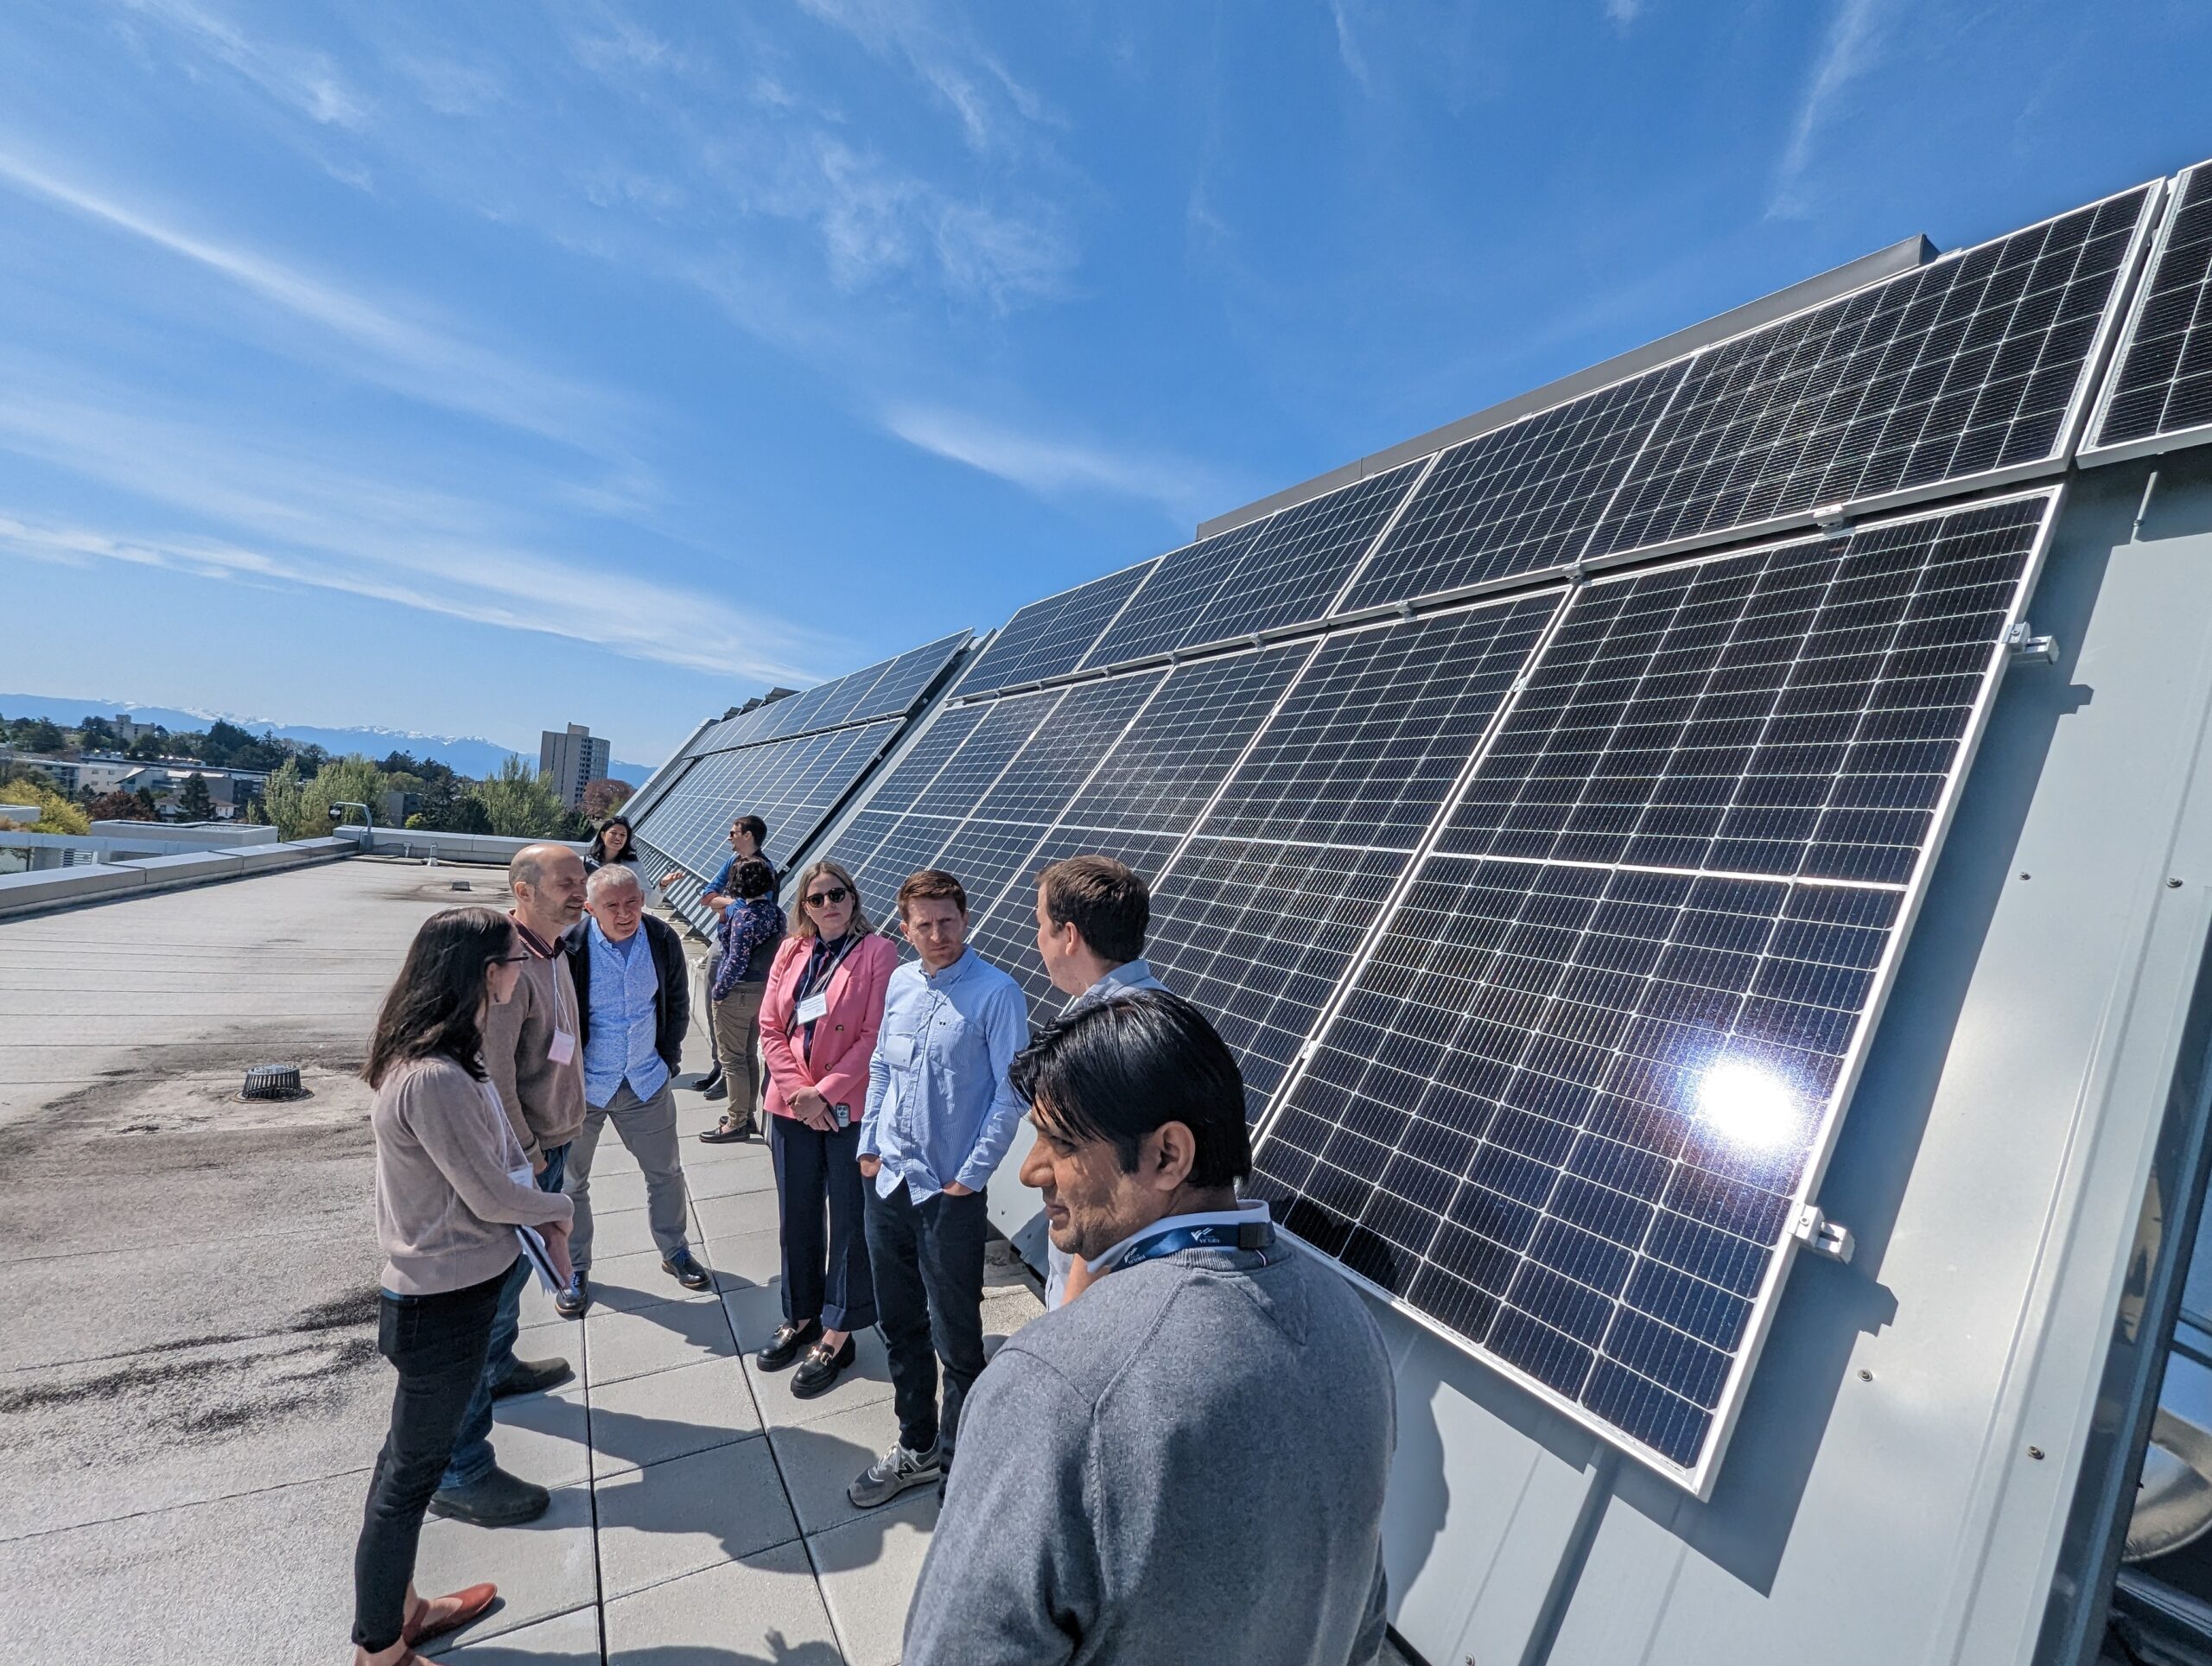 People standing on a rooftop next to solar panels under a blue sky.